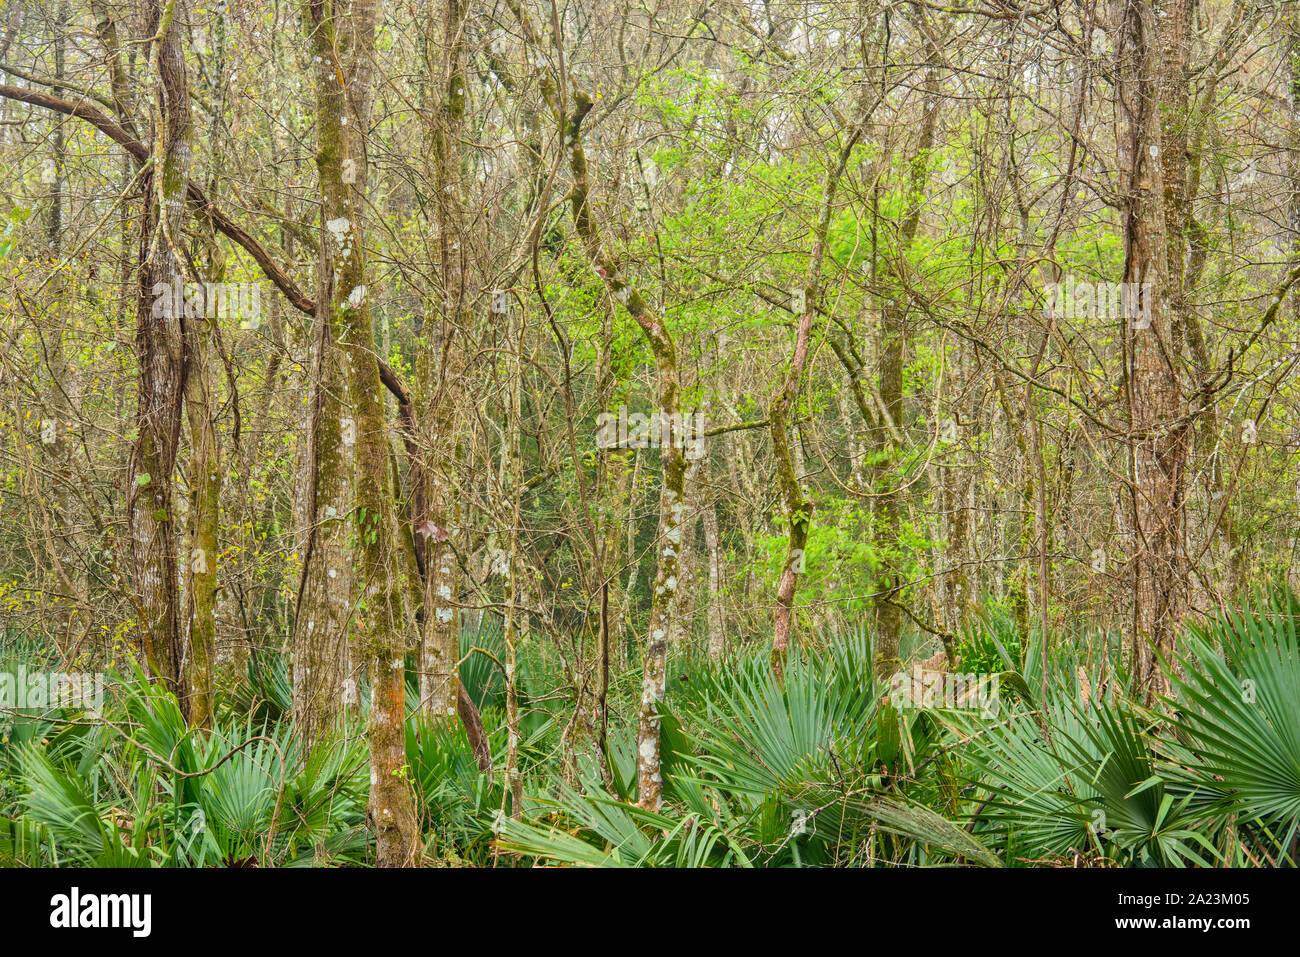 Palmetto understory and spring forest, Palmetto Island State Park, Louisiana, USA Stock Photo